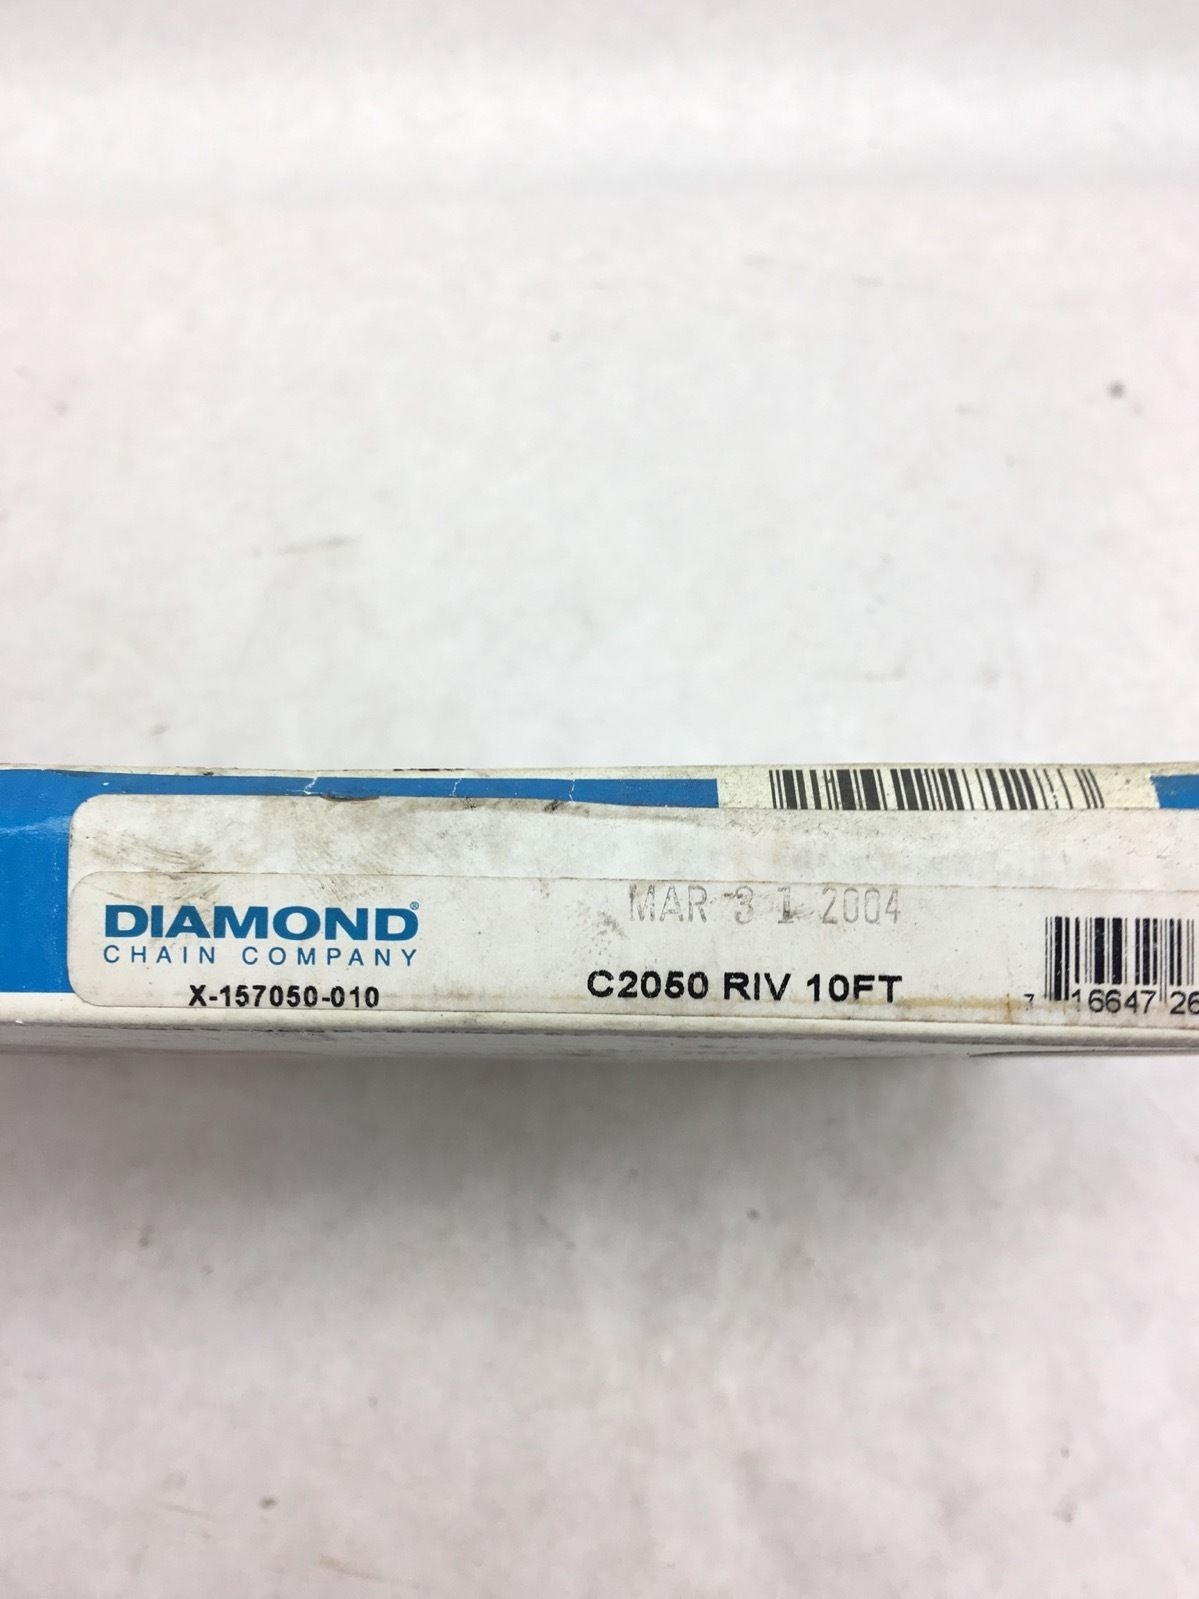 NEW IN BOXÂ DIAMOND C2050 RIV 10 FOOT ROLLER CHAIN, RIVETED, FAST SHIPPING! B349 2